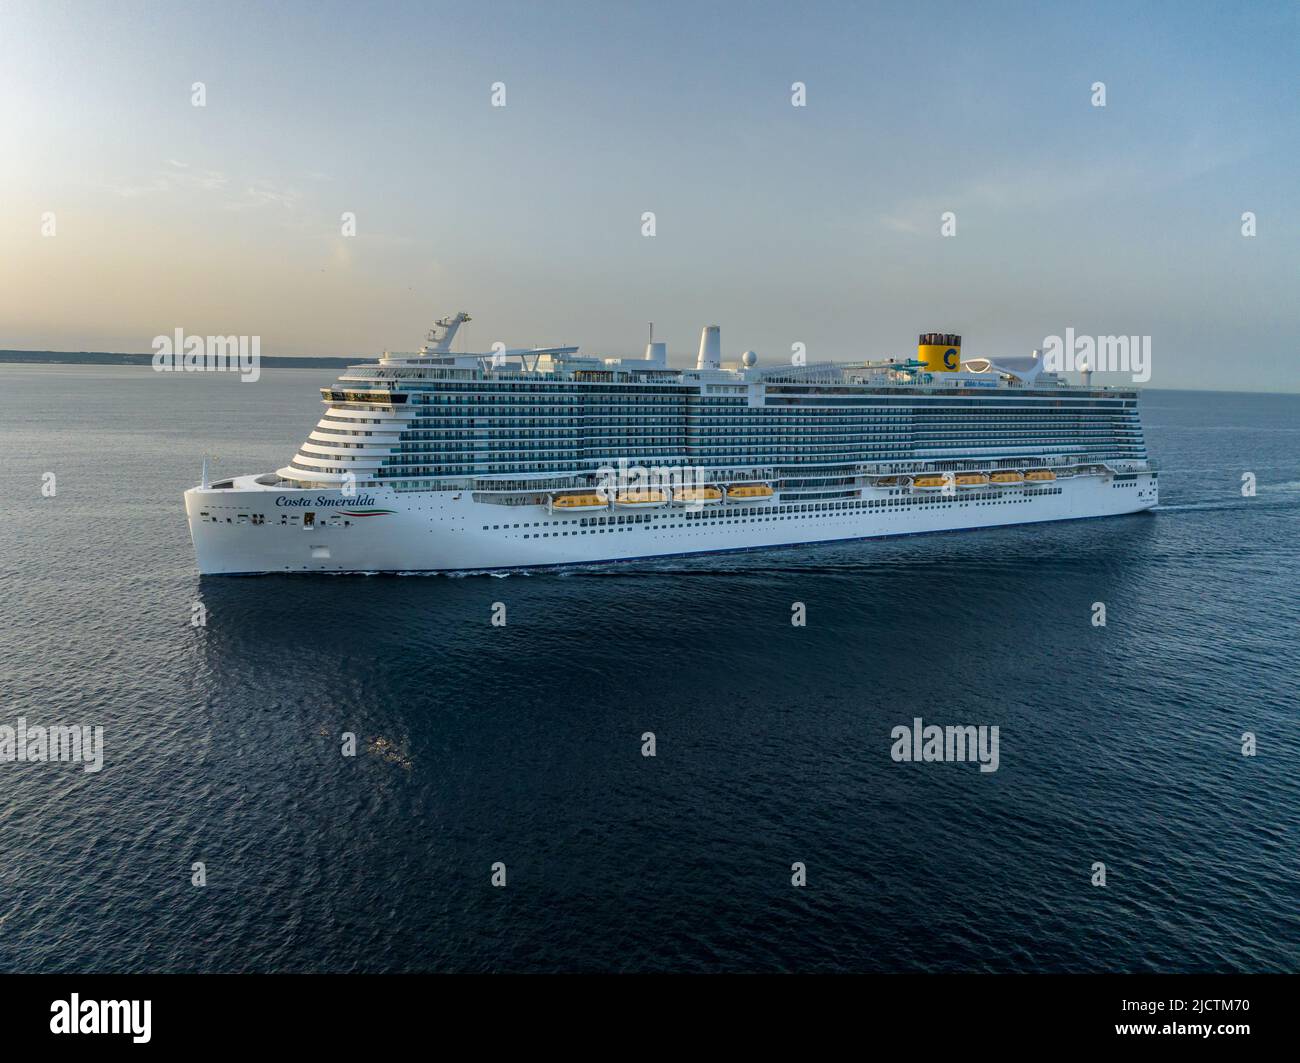 Costa Smeralda is an Excellence-class cruise ship currently operated by Costa Cruises, a subsidiary of Carnival Corporation.  aerial view. Stock Photo